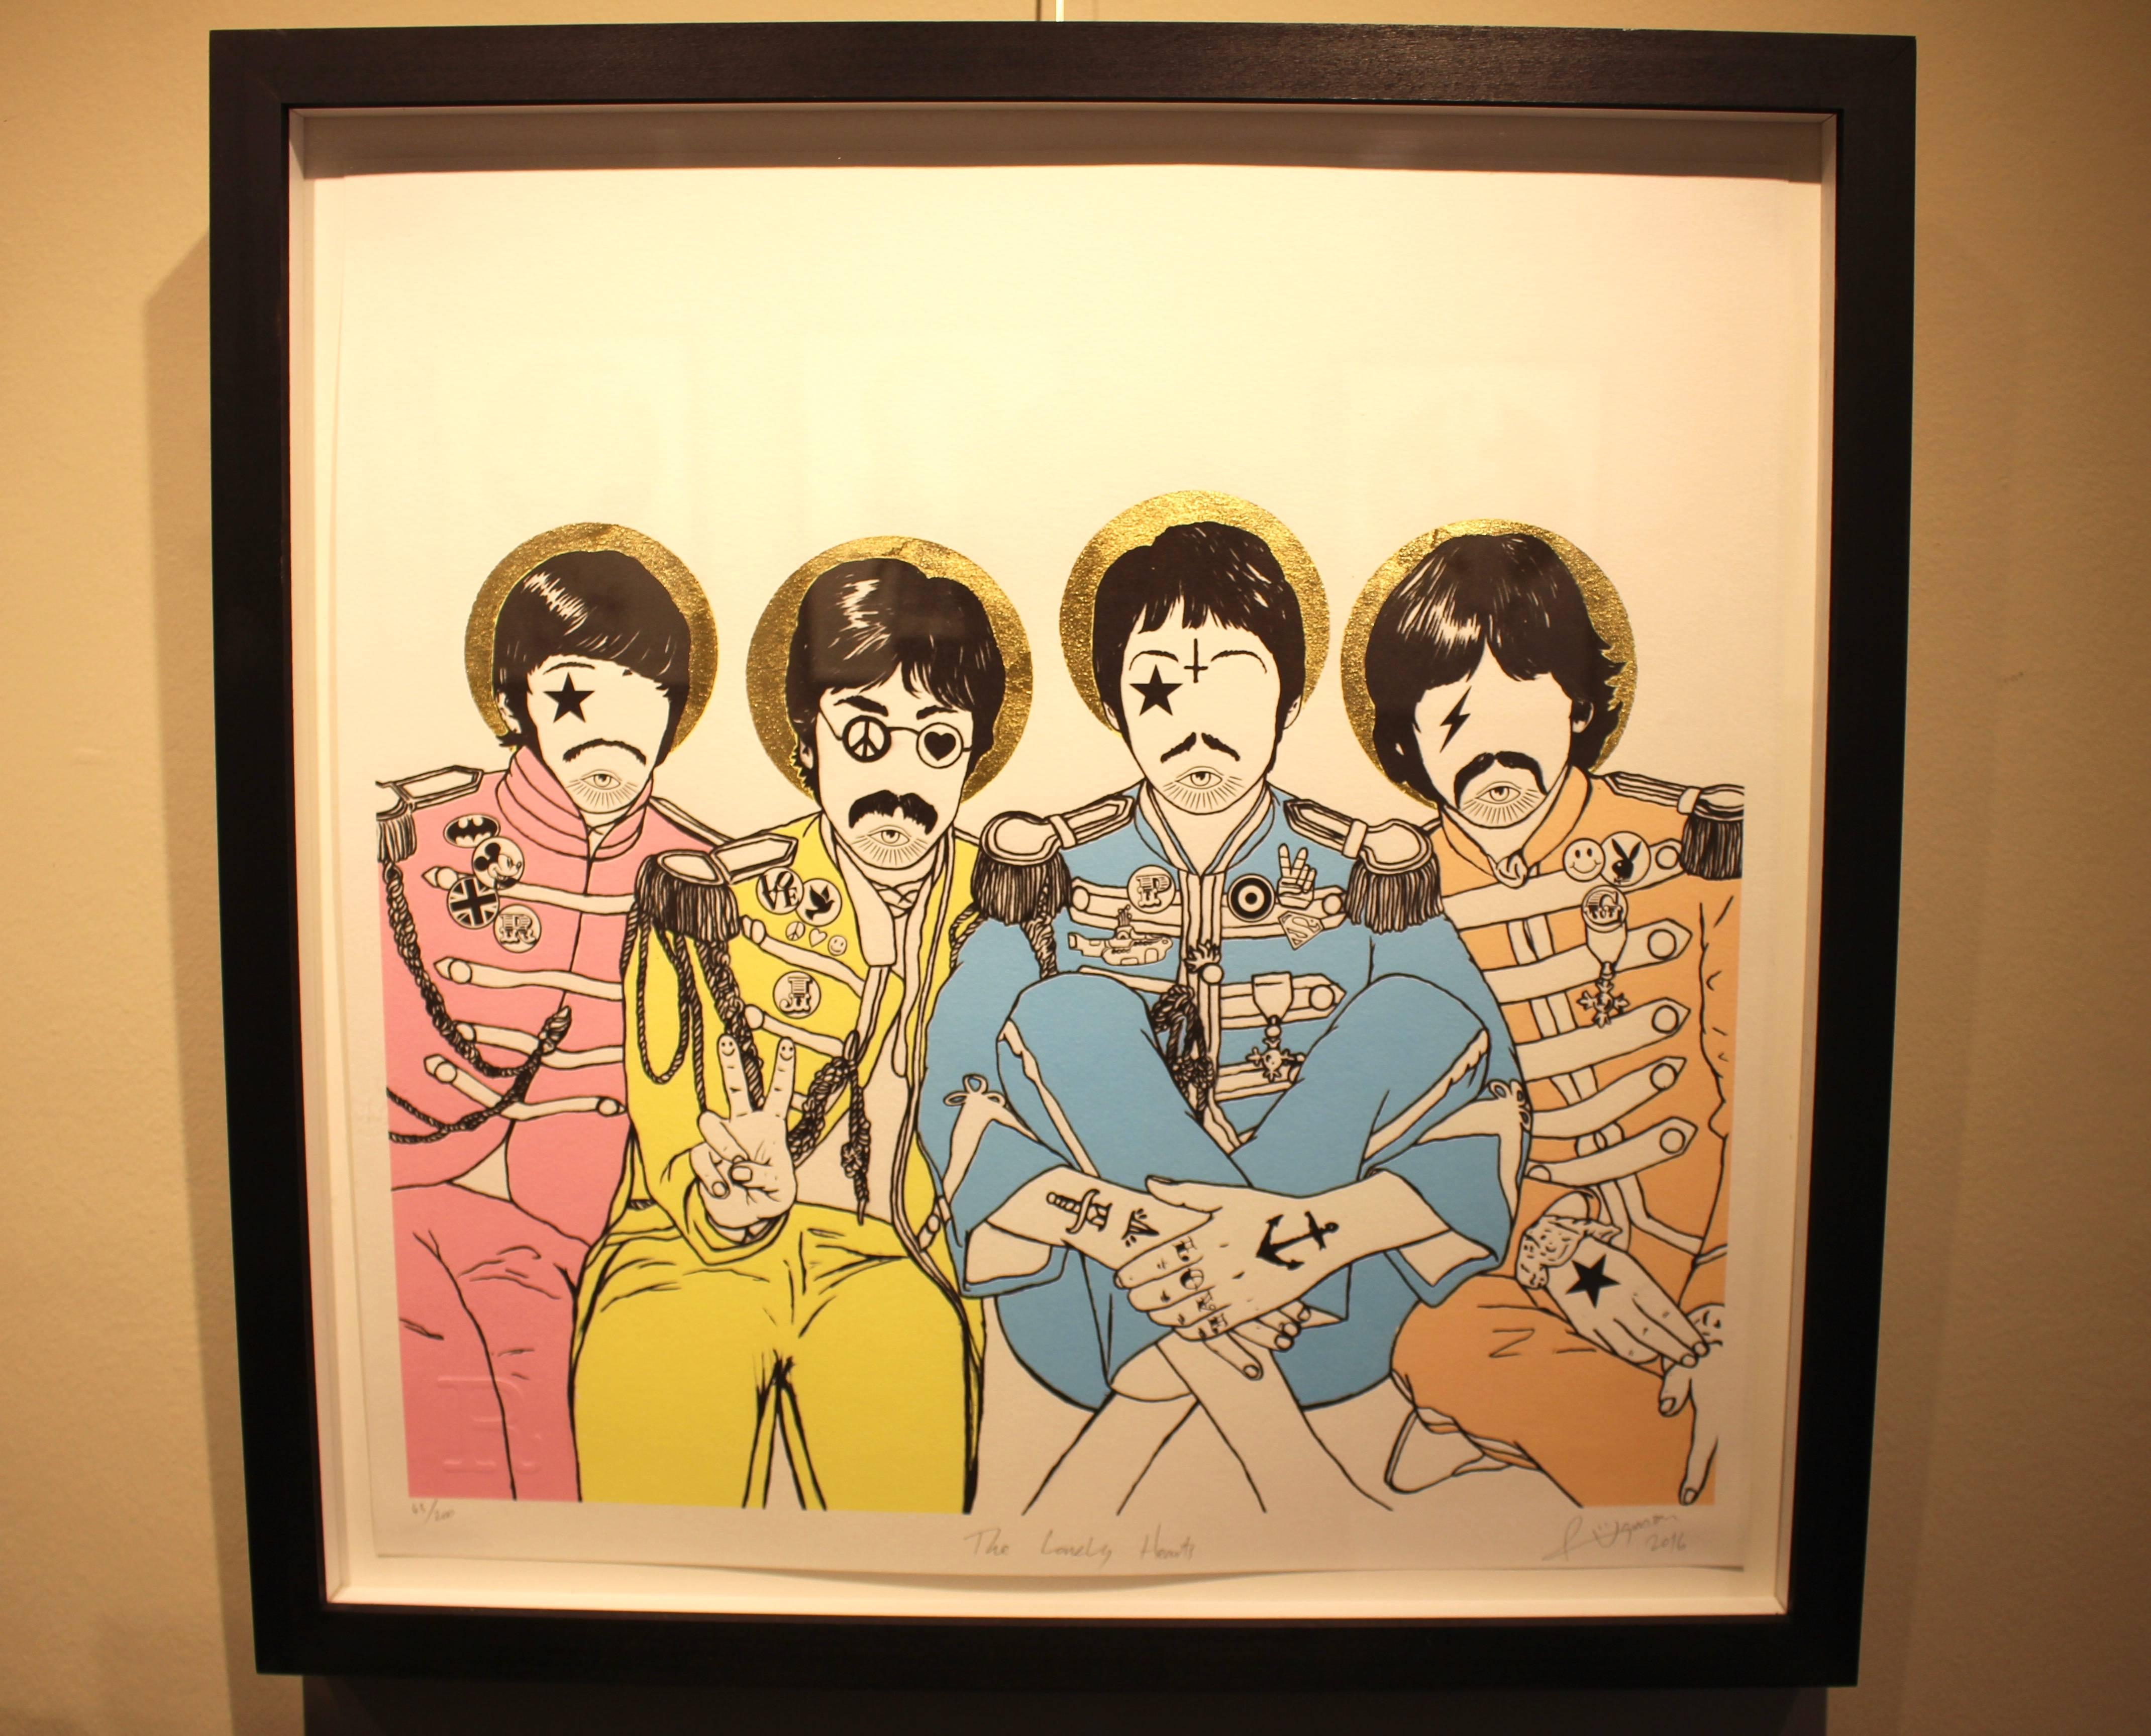 The Lonely Hearts - Beatles - Print by Rugman